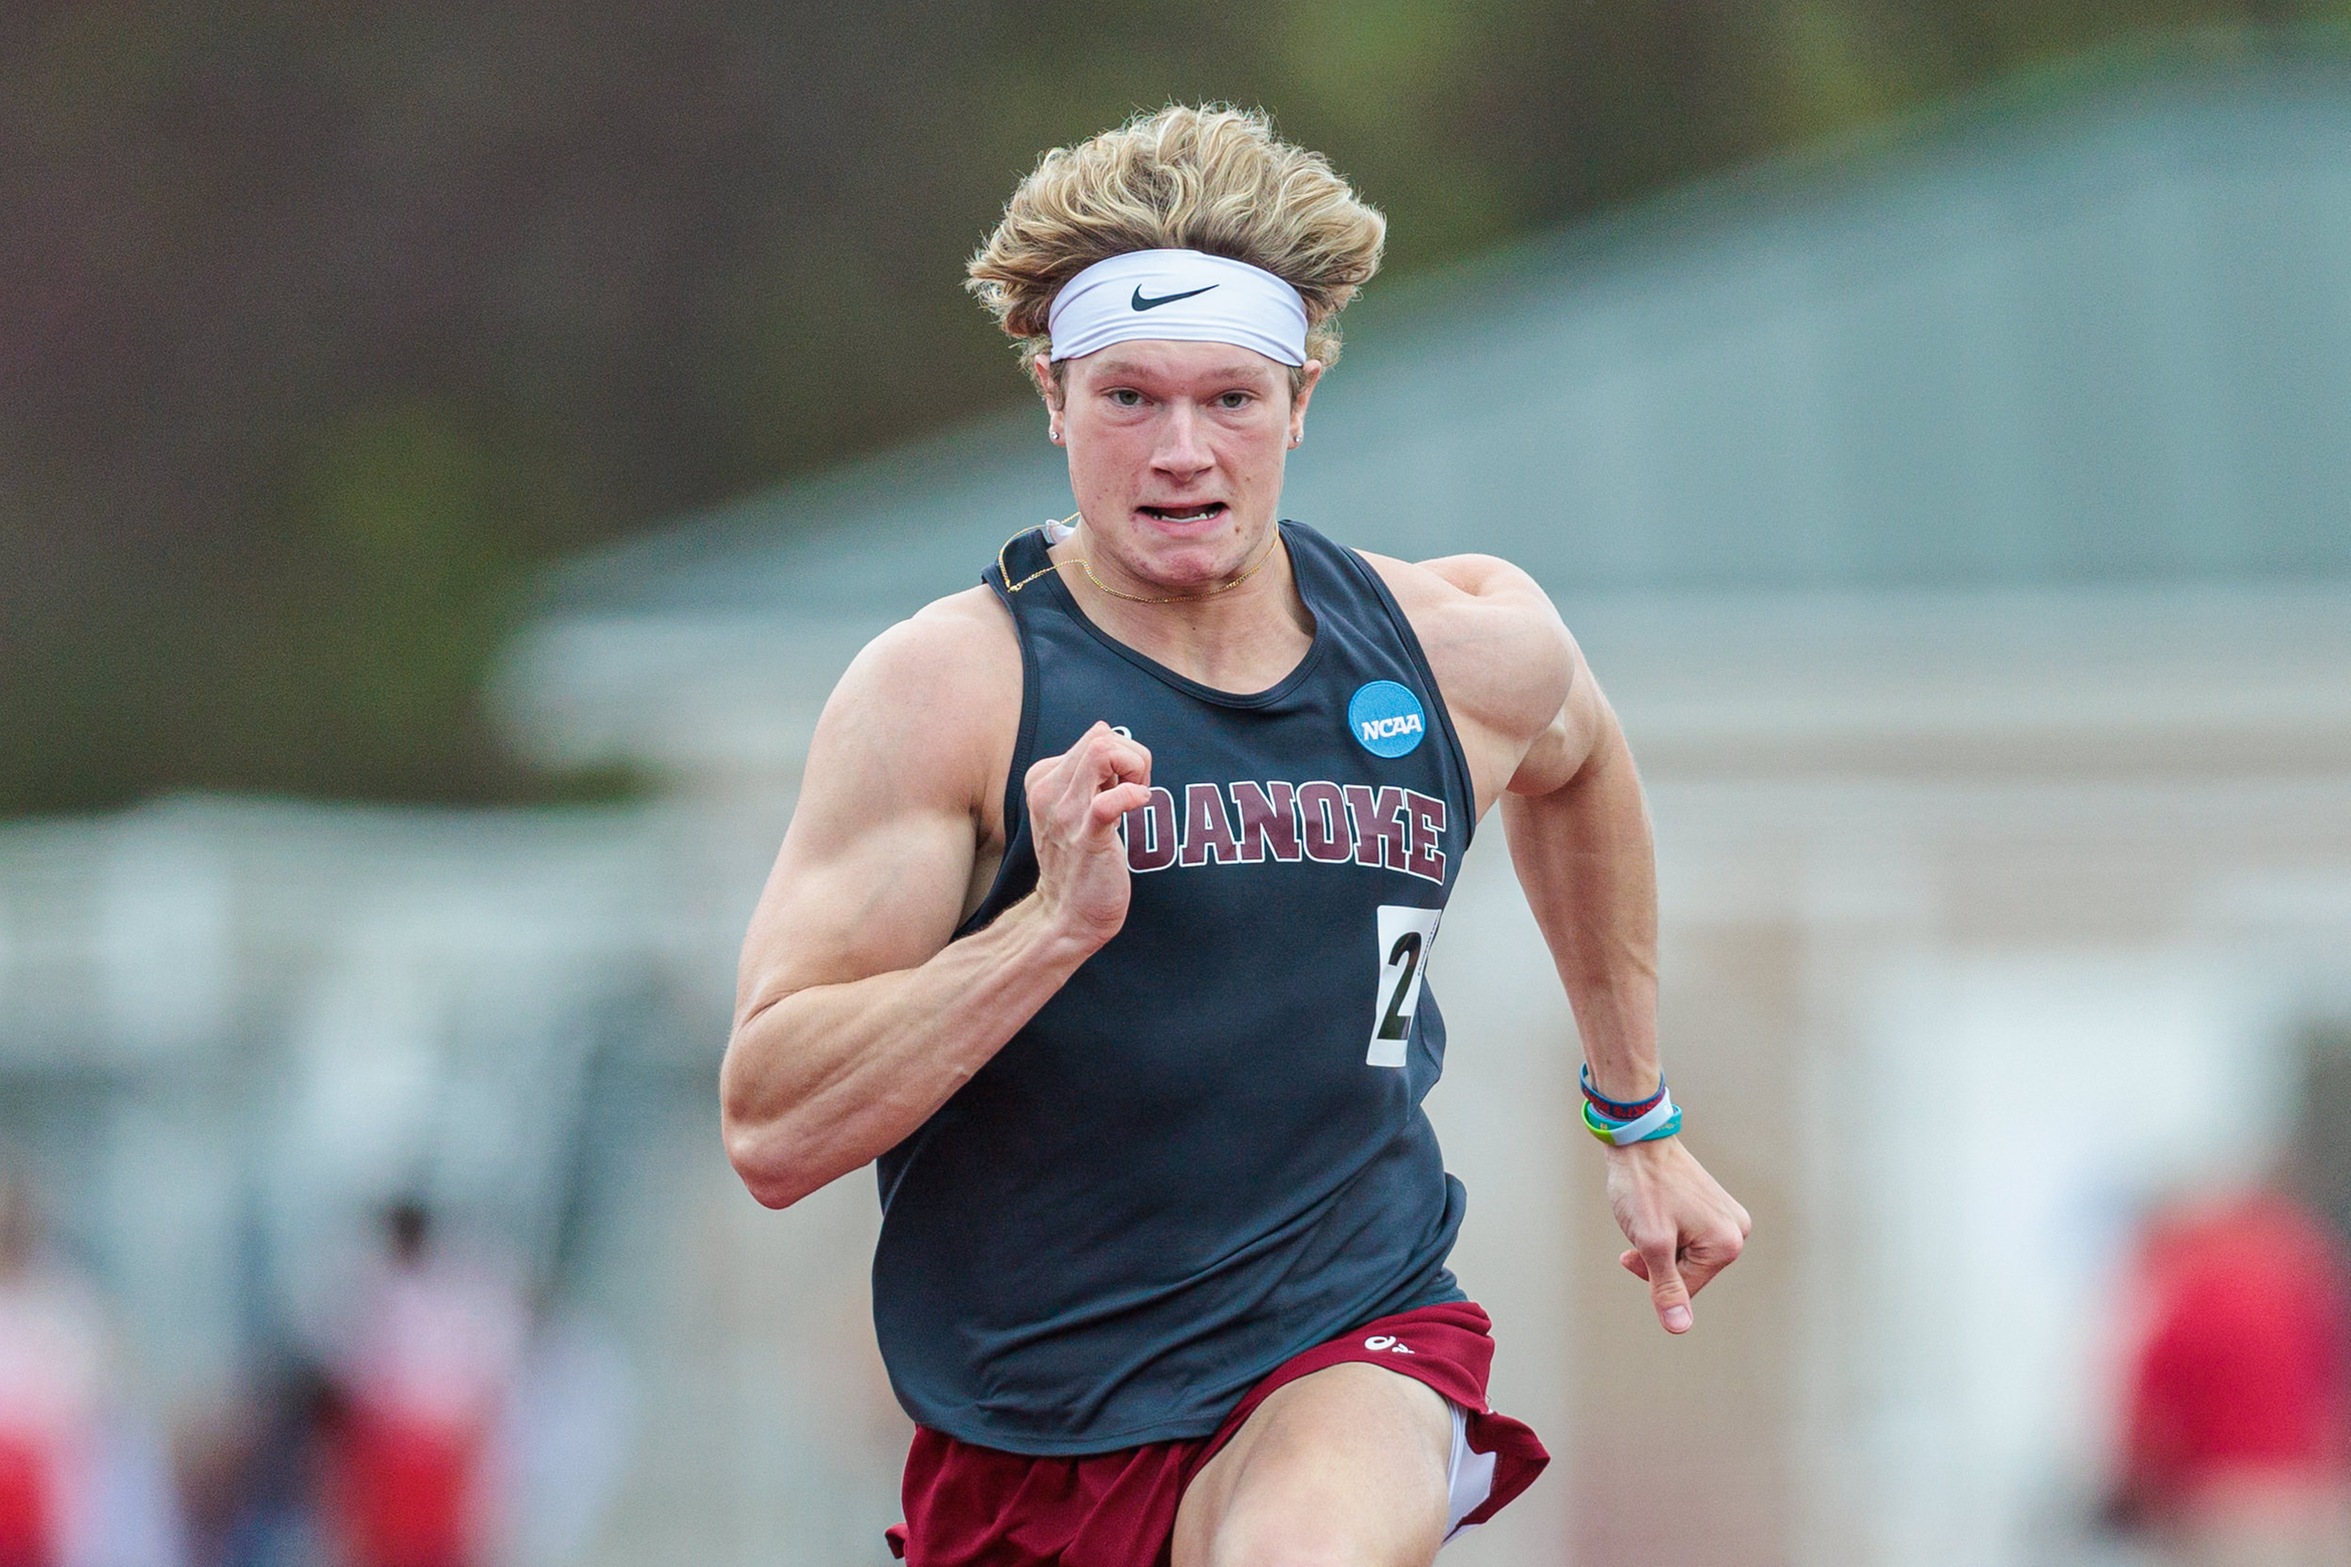 Fowler to Compete in 100, 200 at NCAA Outdoor Championships